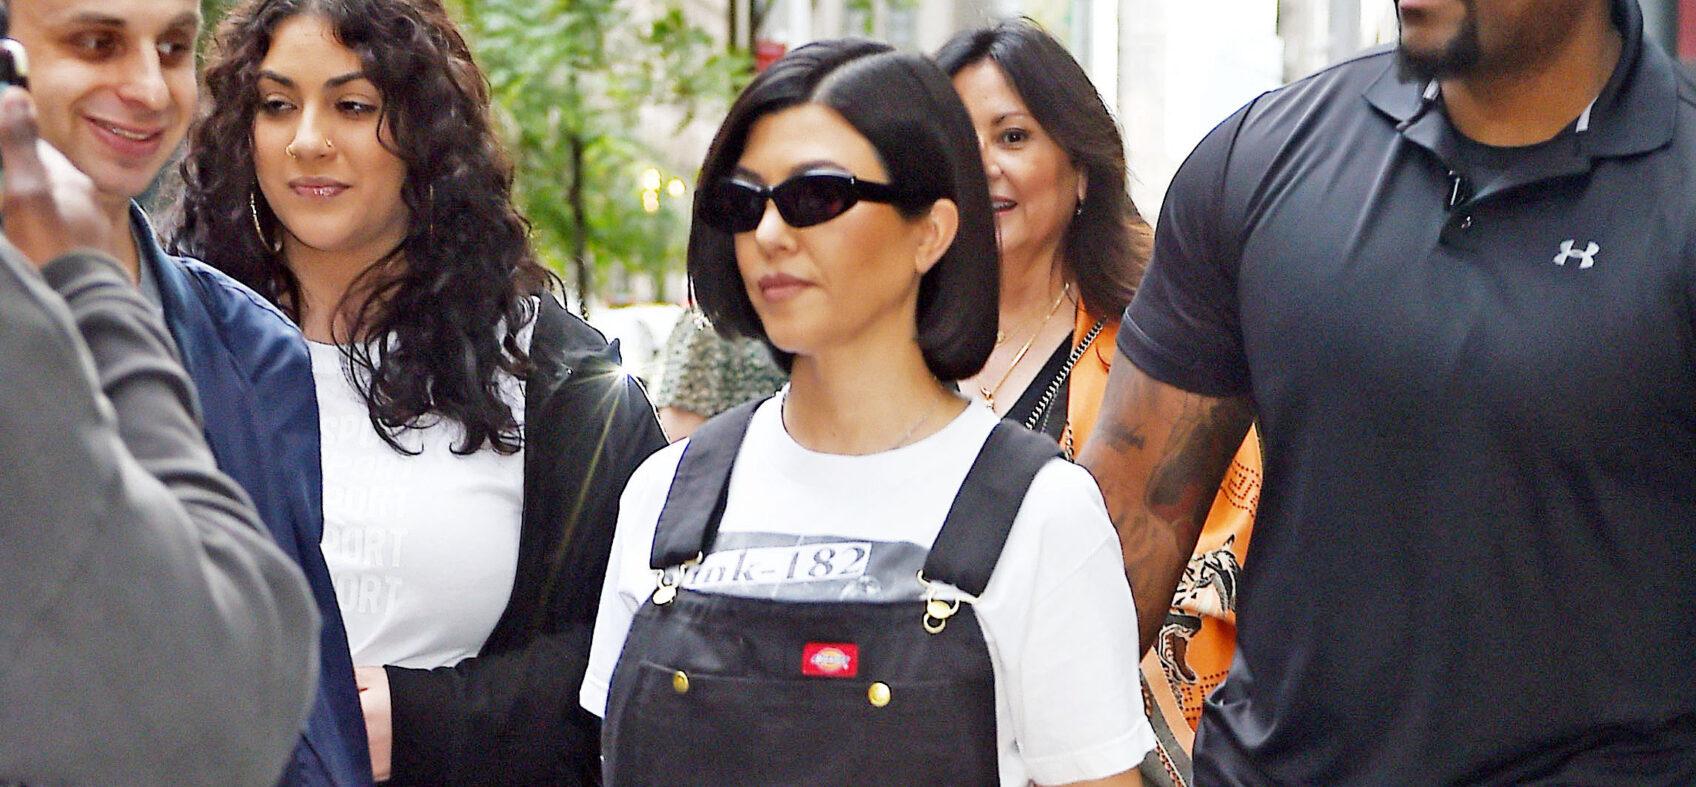 Kourtney Kardashian heads out in a Blink-182 t-shirt and overalls